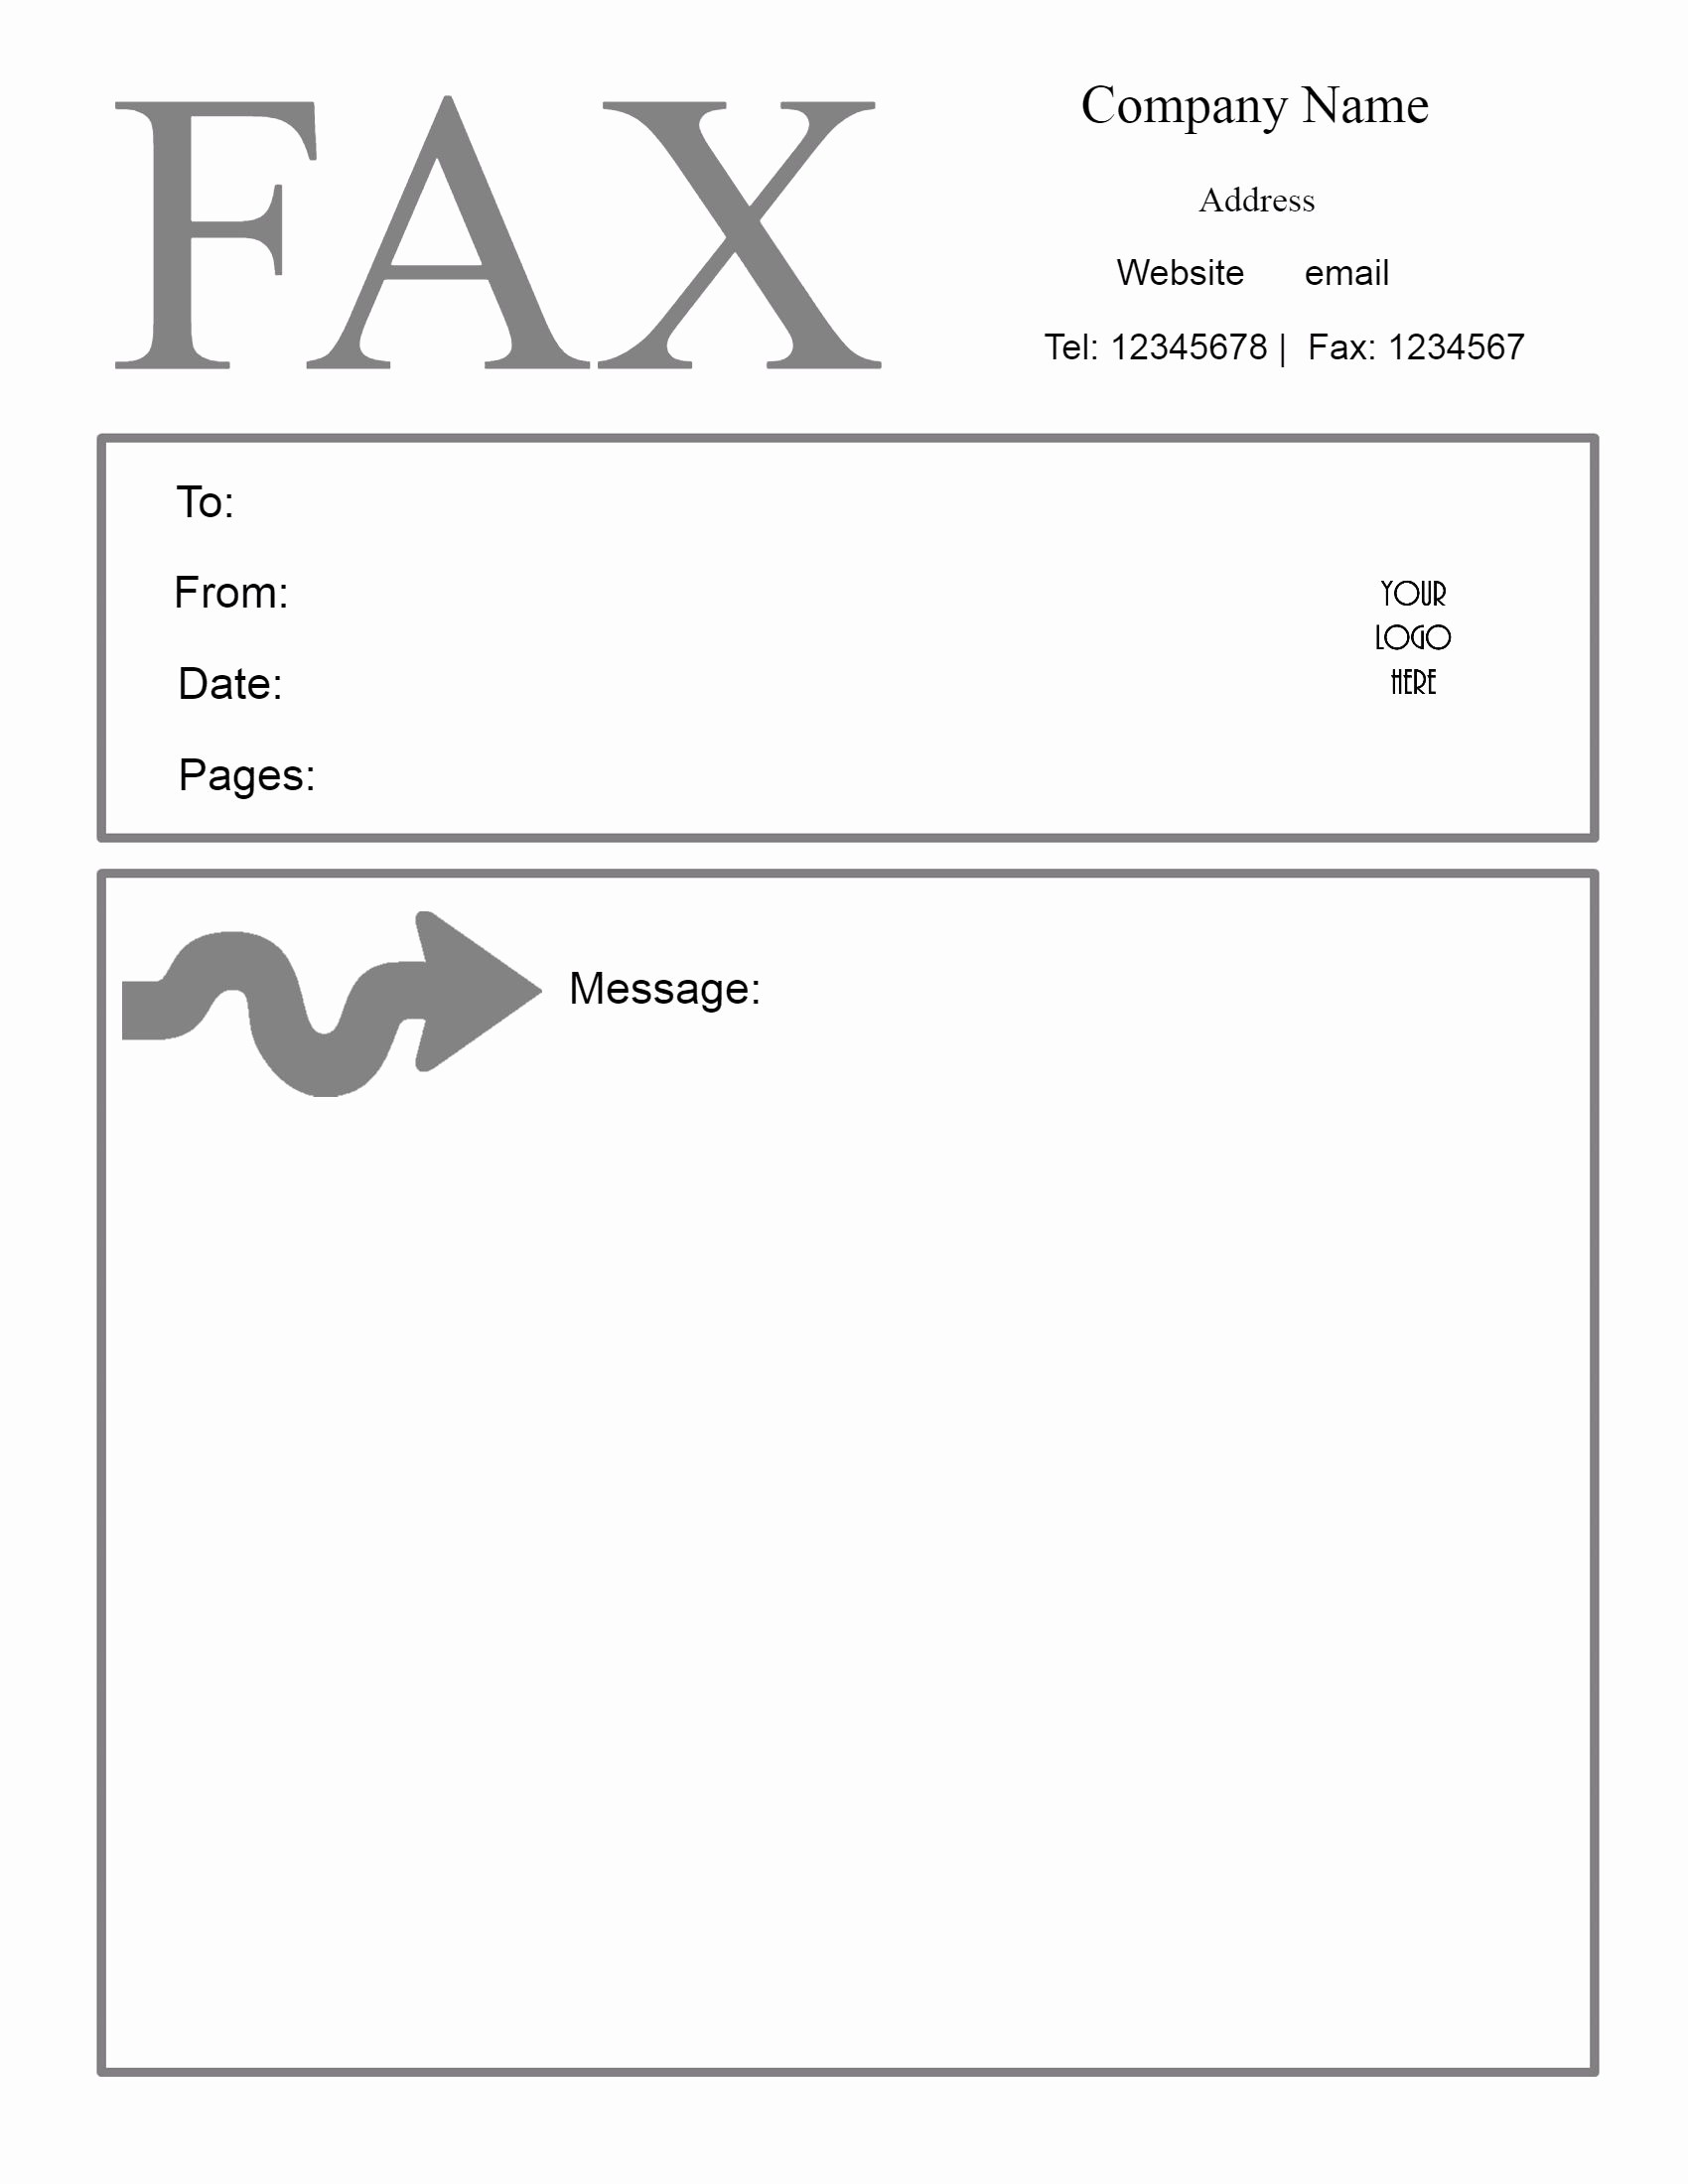 Cover Sheet for Fax Example Luxury Free Fax Cover Sheet Template